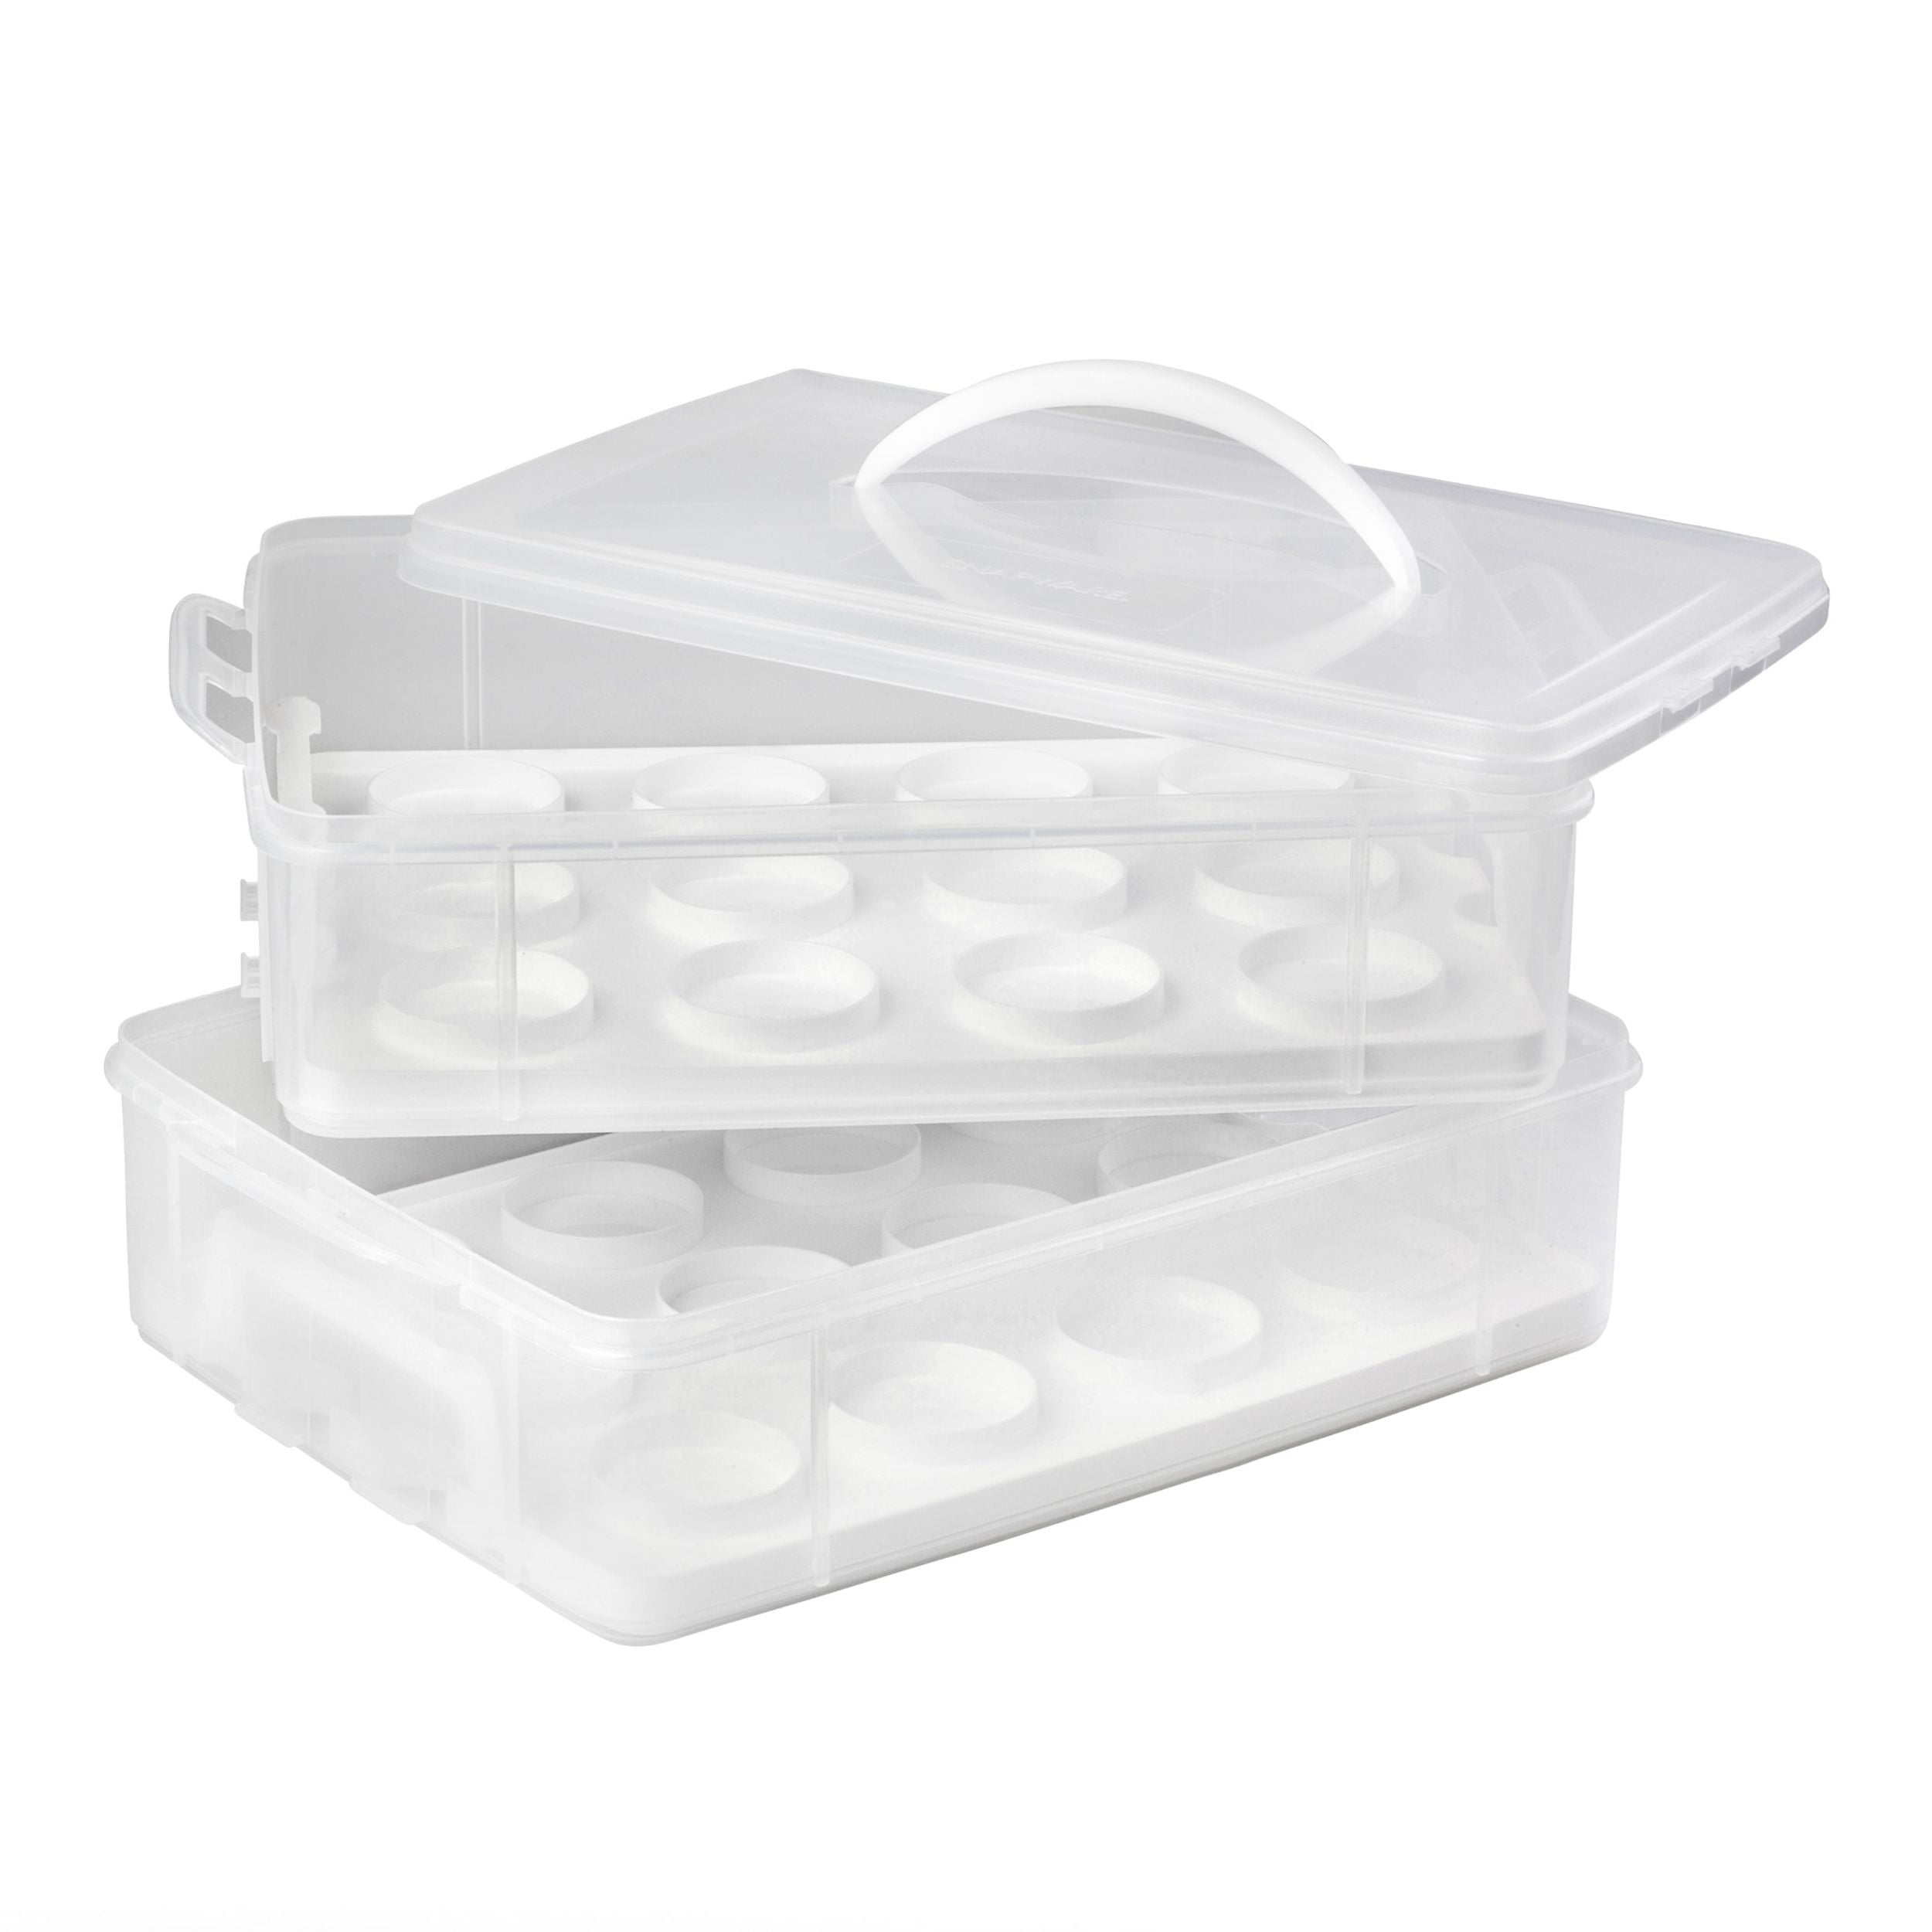 Snapware Plastic Small Round Containers - 2 Pack - Transparent, 1.2 c -  Kroger